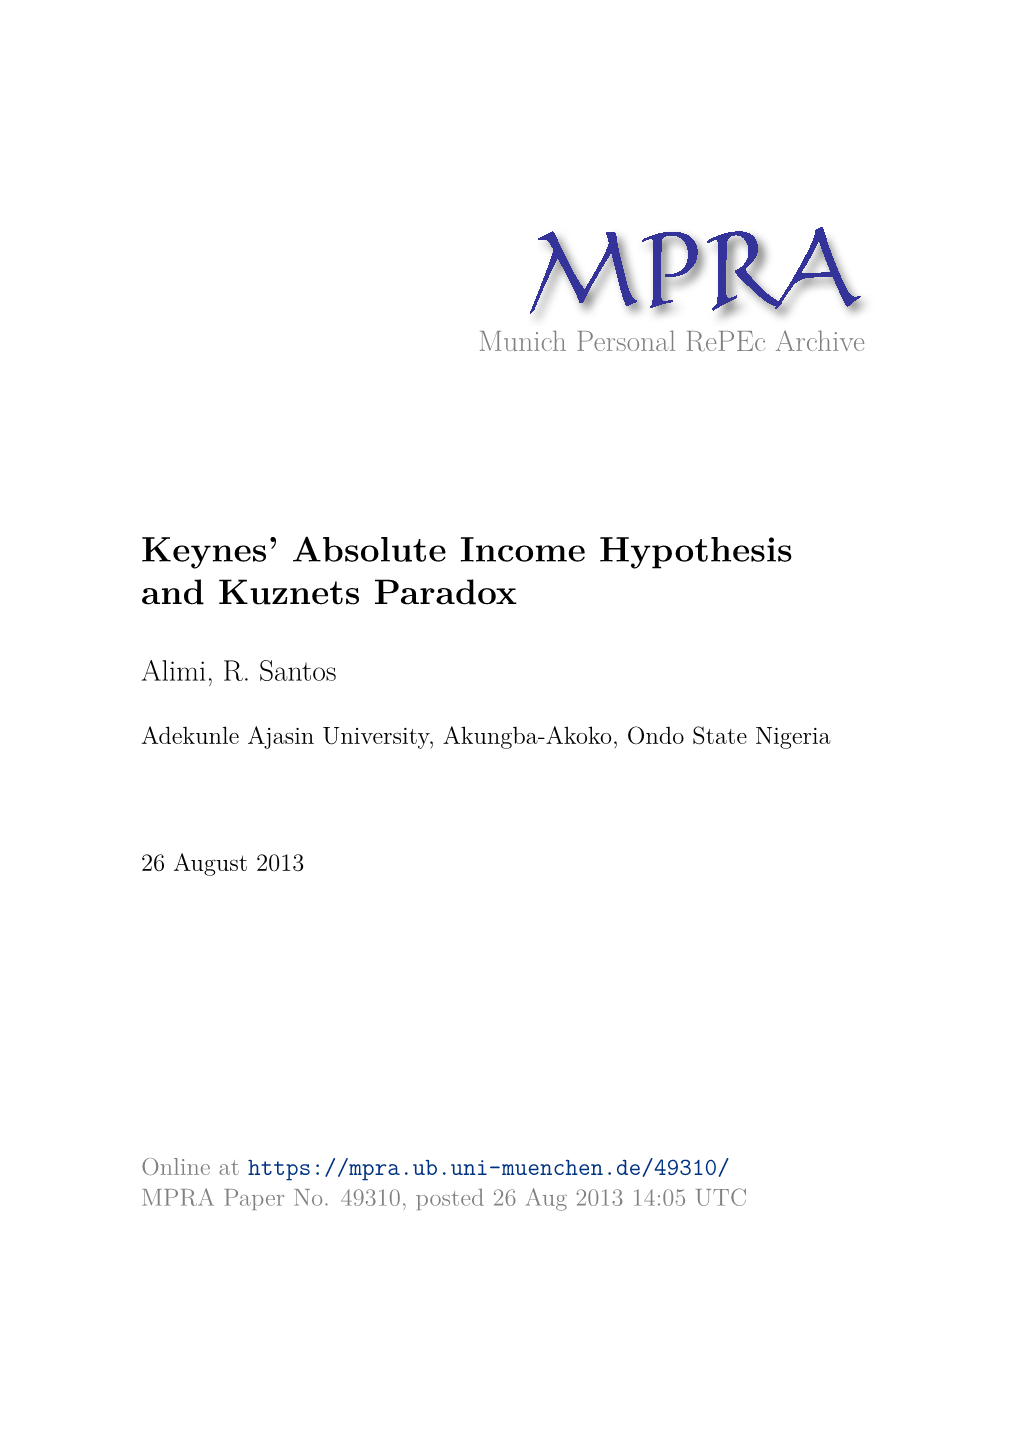 Keynes' Absolute Income Hypothesis and Kuznets Paradox